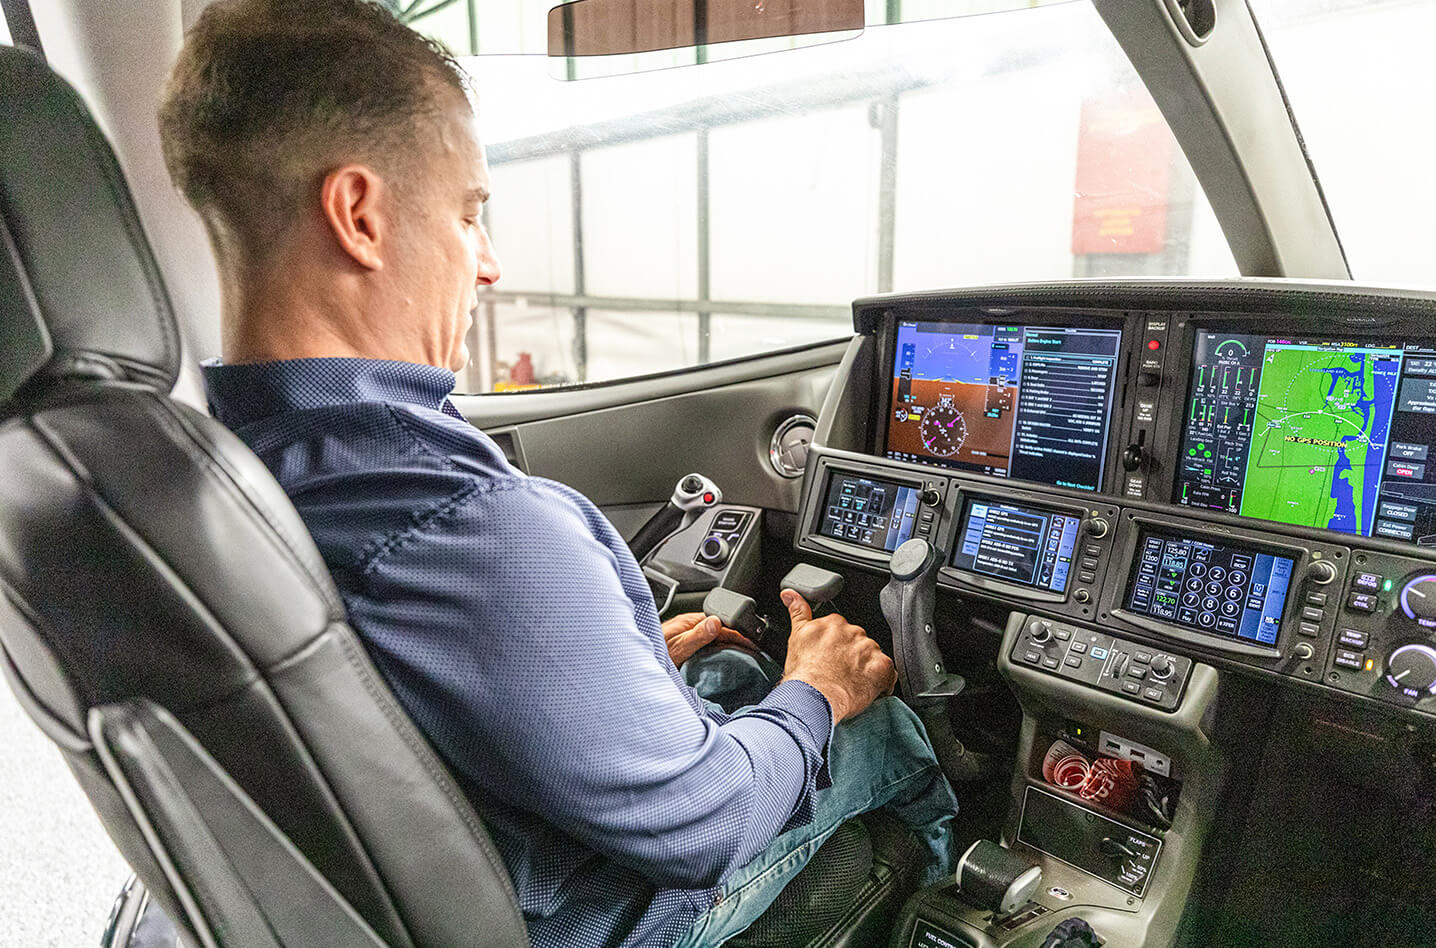 CEO Clayton Smeltz designed custom hand controls for his Vision Jet